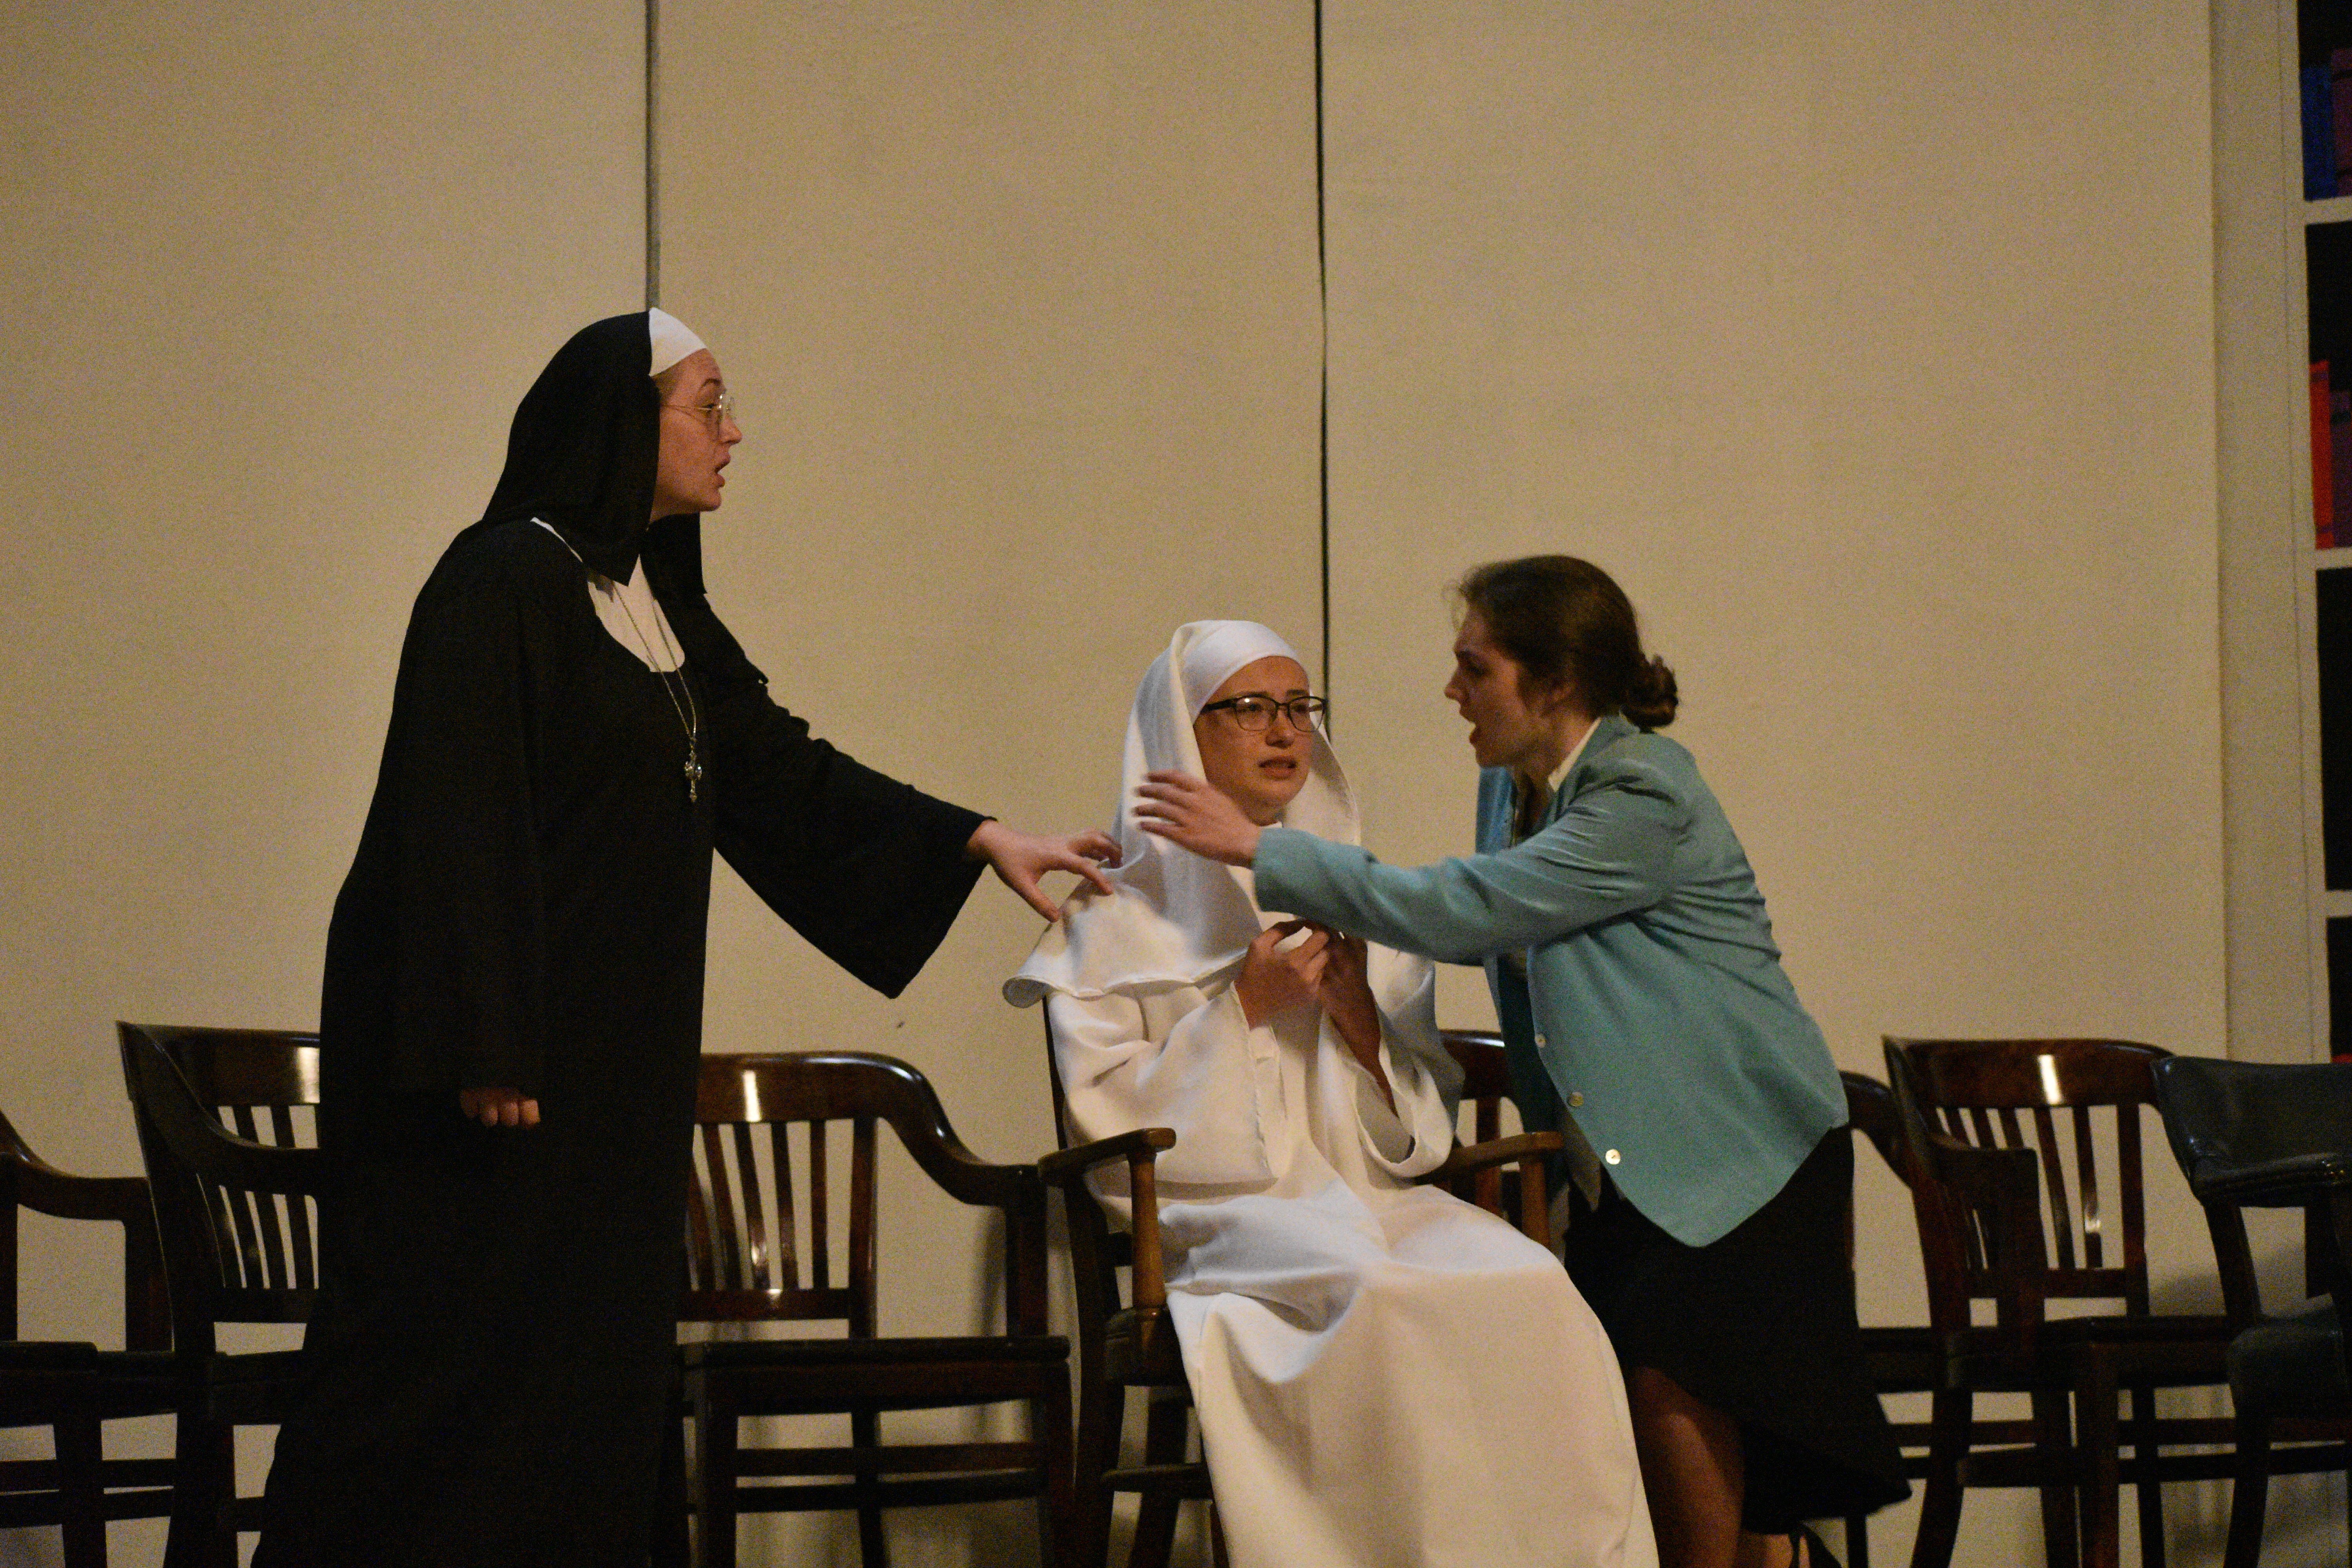 Actresses Kassidy Giles, Lela Ball and Grace Terry in "Agnes of God." Photo by Sarah Combs.